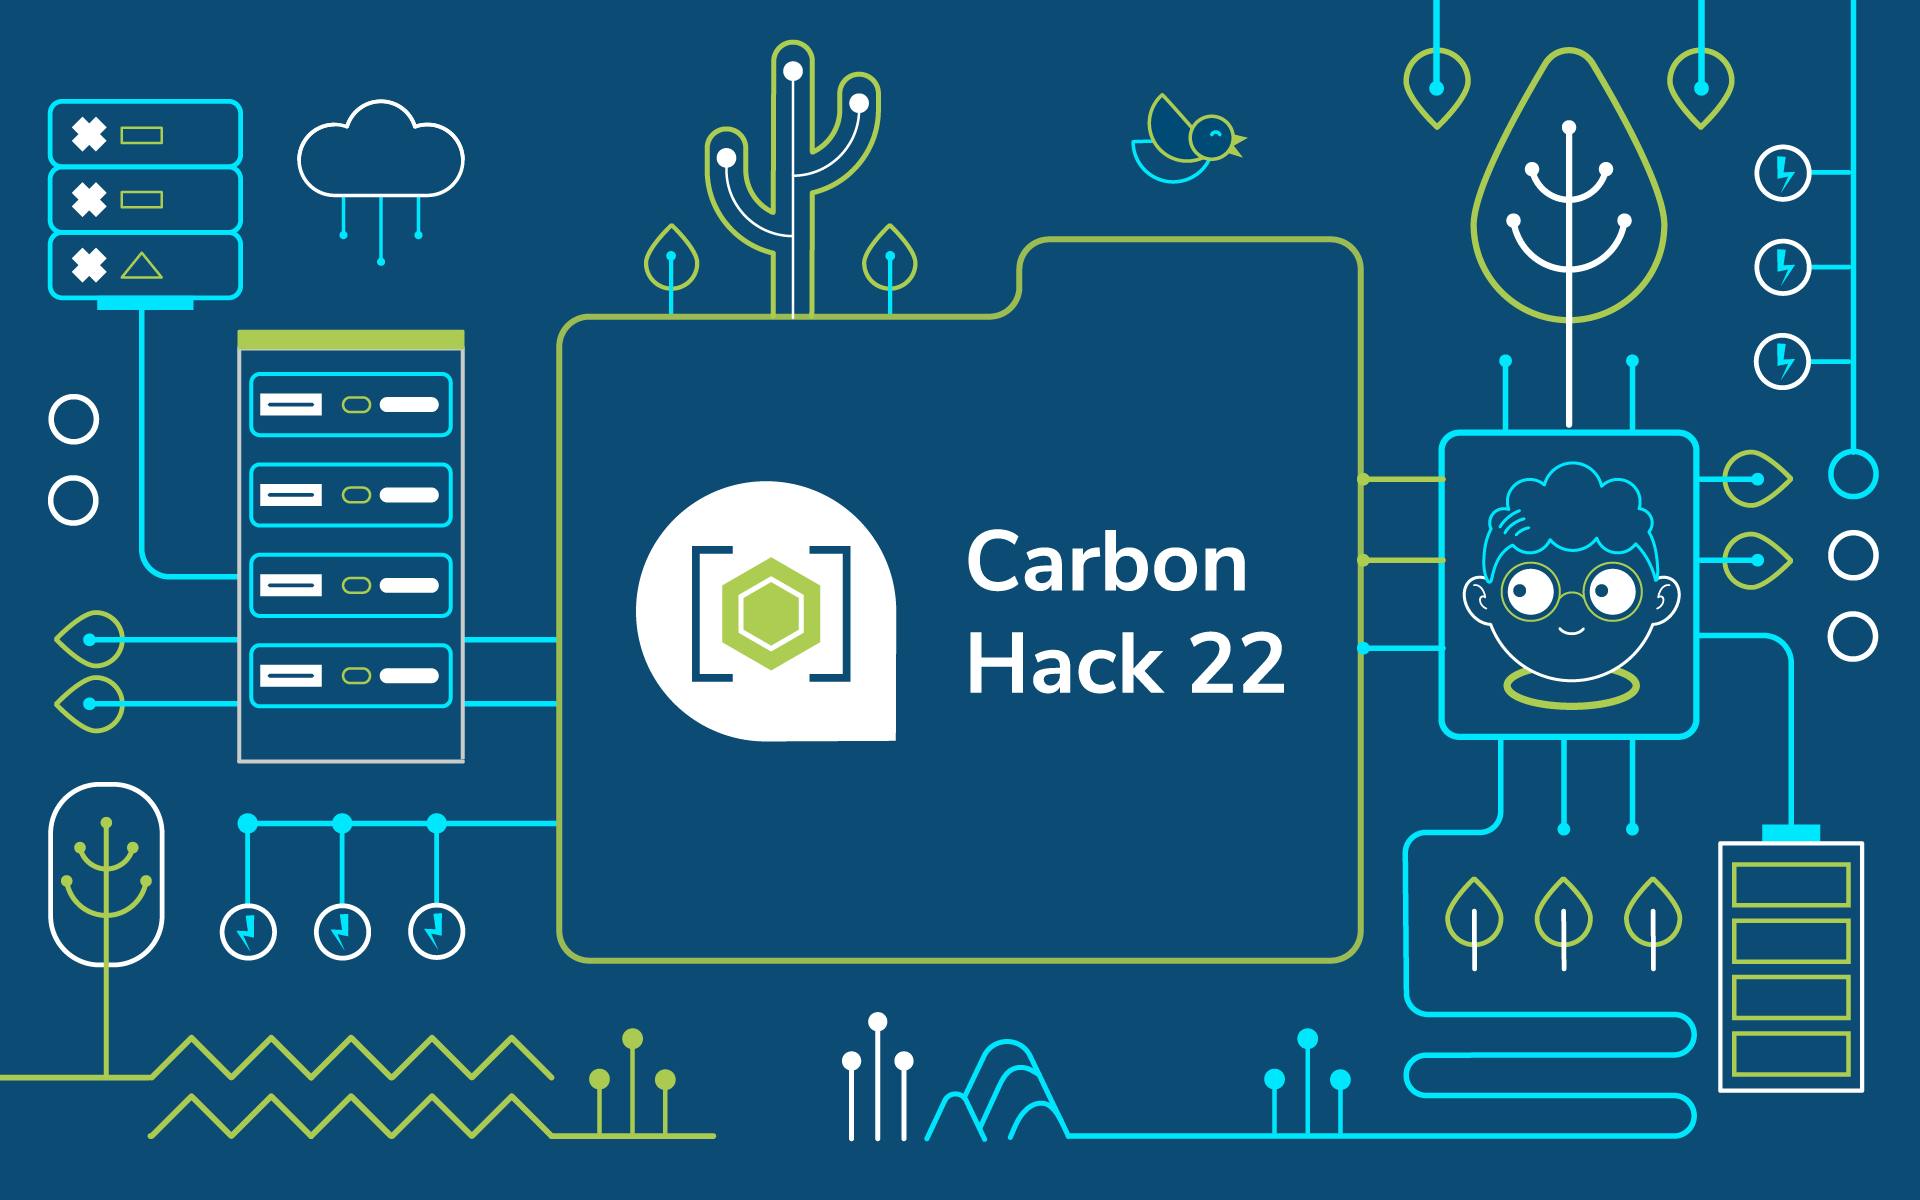 That’s a wrap - CarbonHack22 a big leap in carbon aware computing